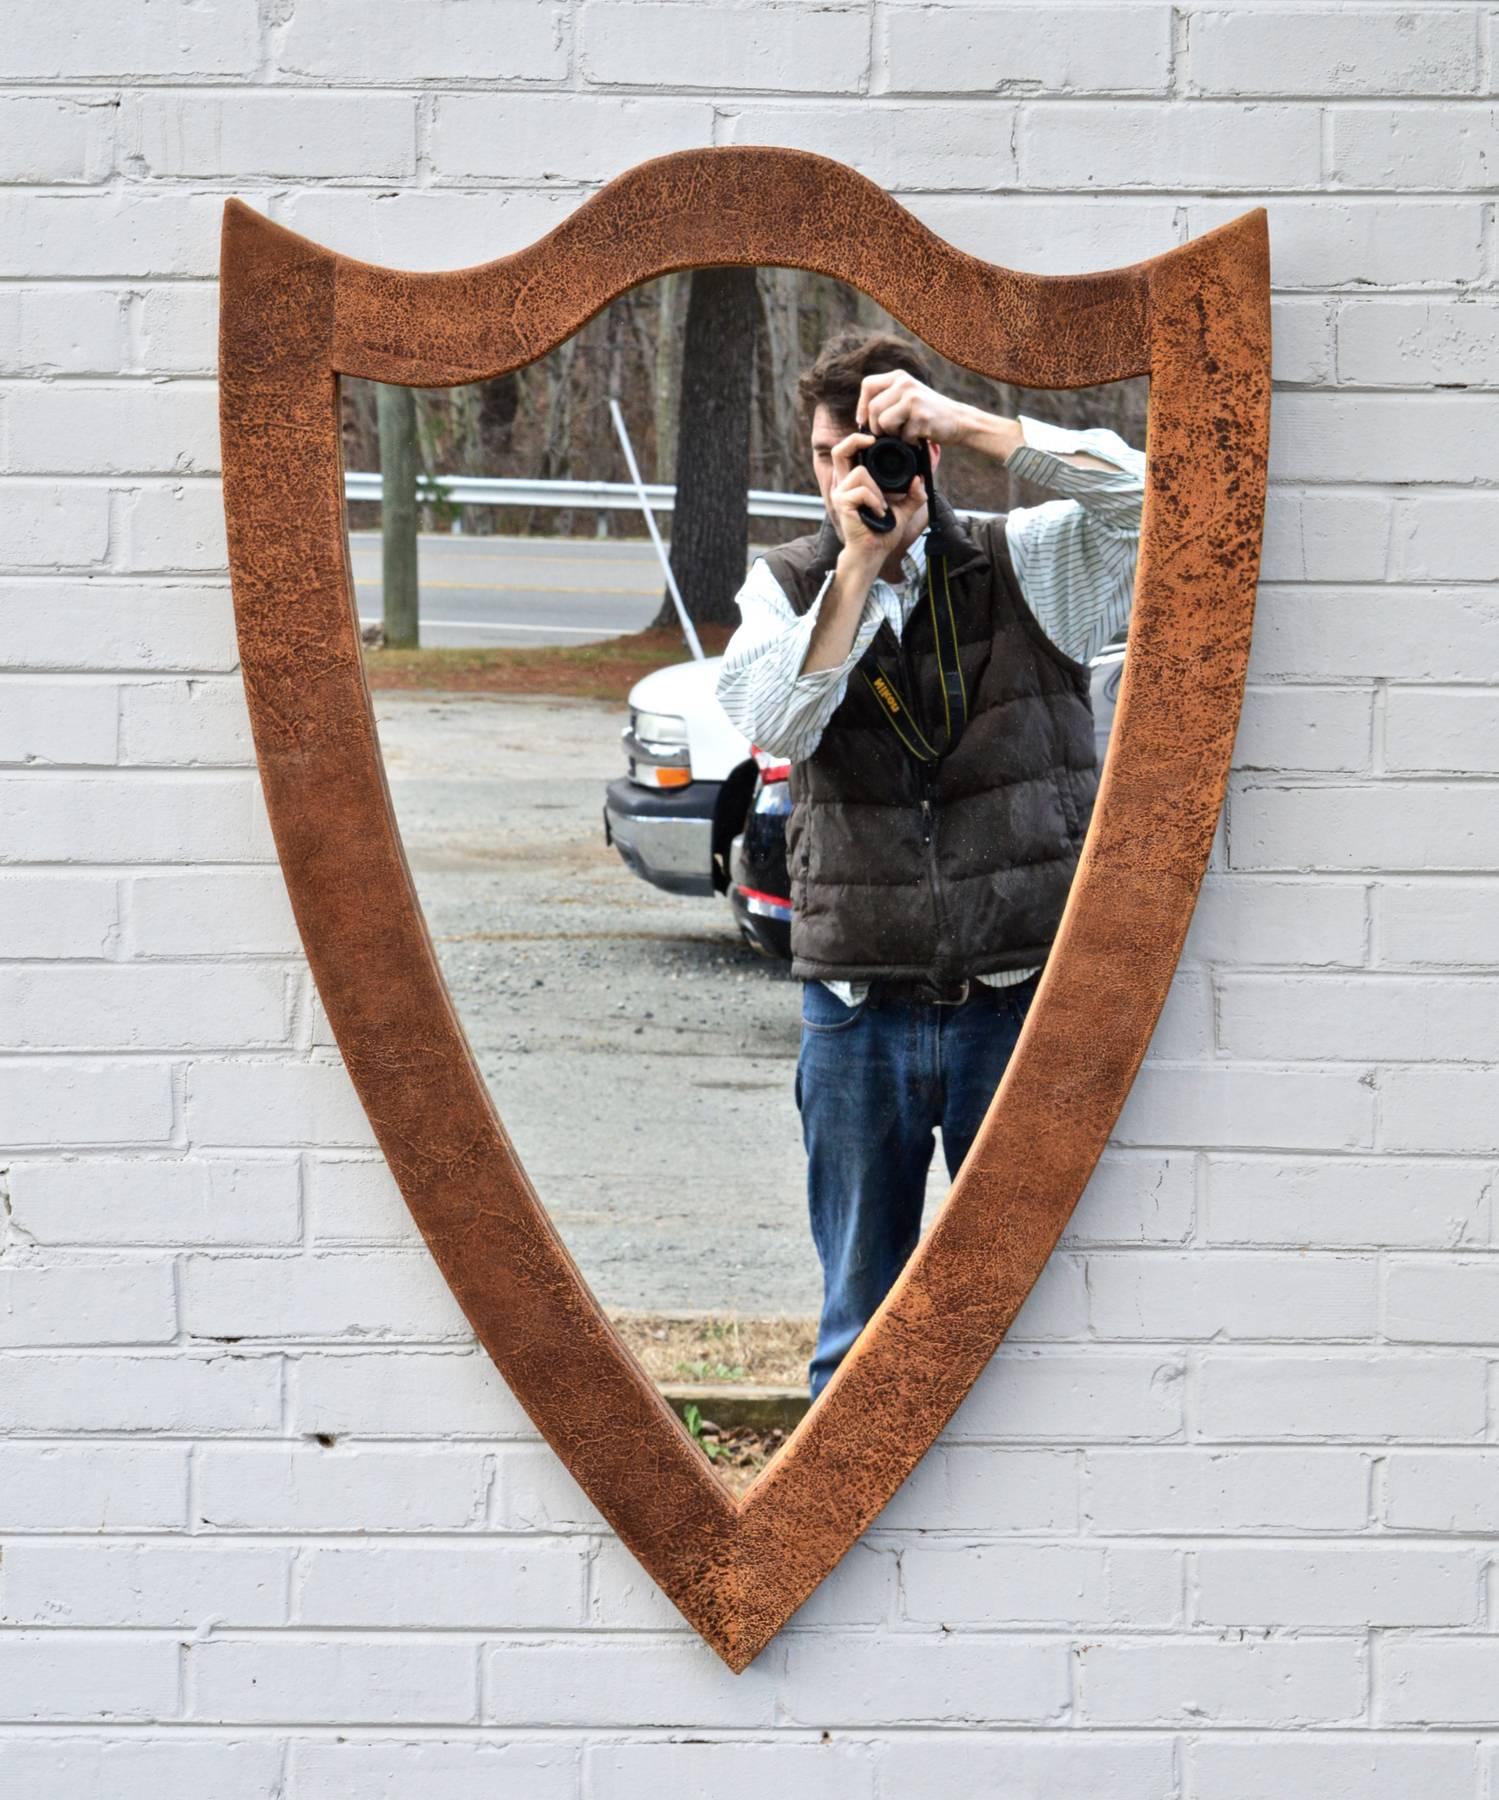 An elegantly rustic shield form mirror of hand wrapped leather. The soft and supple calfskin feels truly luxurious to the touch. This looking glass is equally at home in a rustic chic cabin or above a chest of drawers in an urban loft. Custom sizes